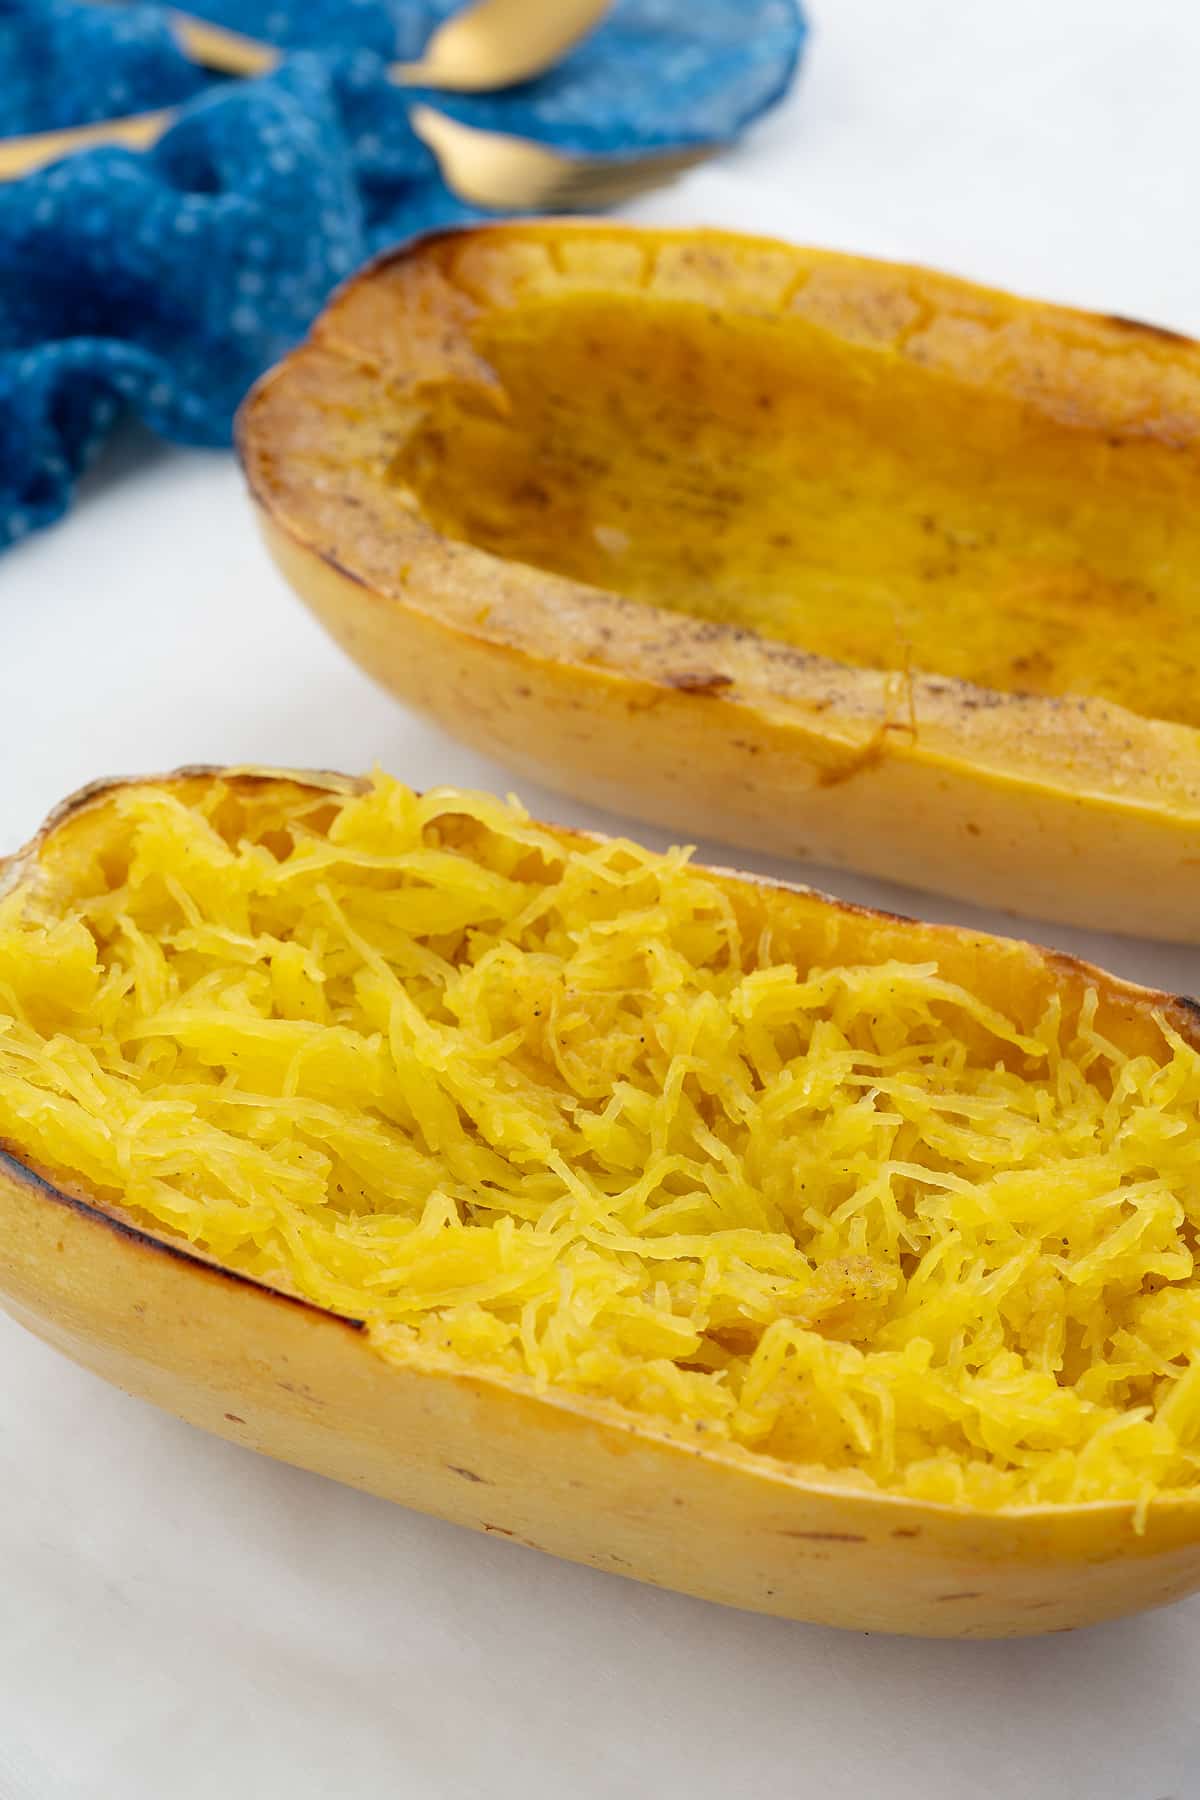 Two halves of baked spaghetti squash on a white table, with a blue towel and a golden fork nearby.